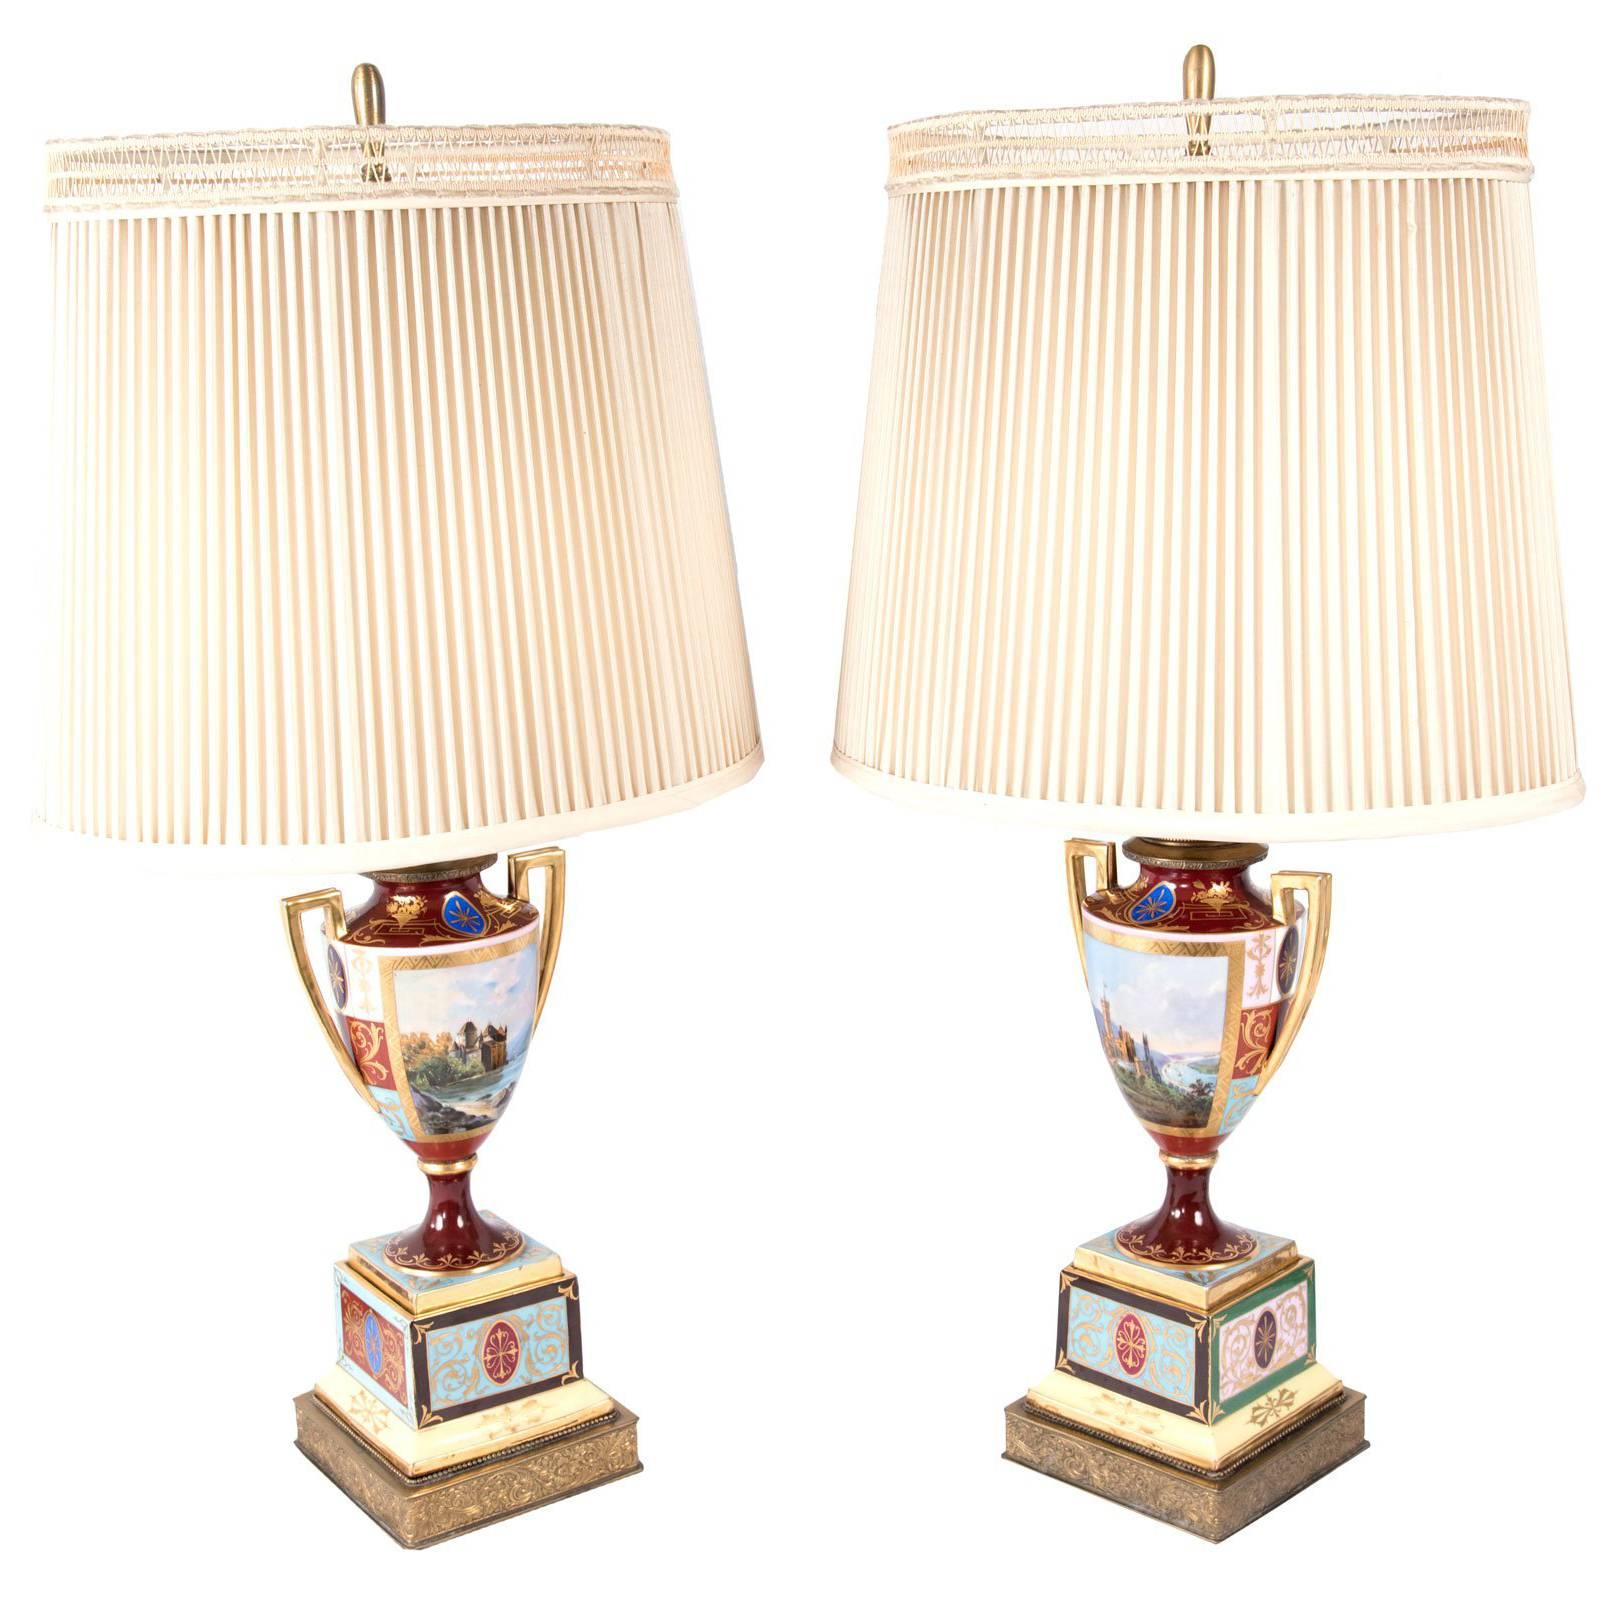 Pair of Neoclassical Royal Vienna Porcelain Urn-Shaped Table Lamps